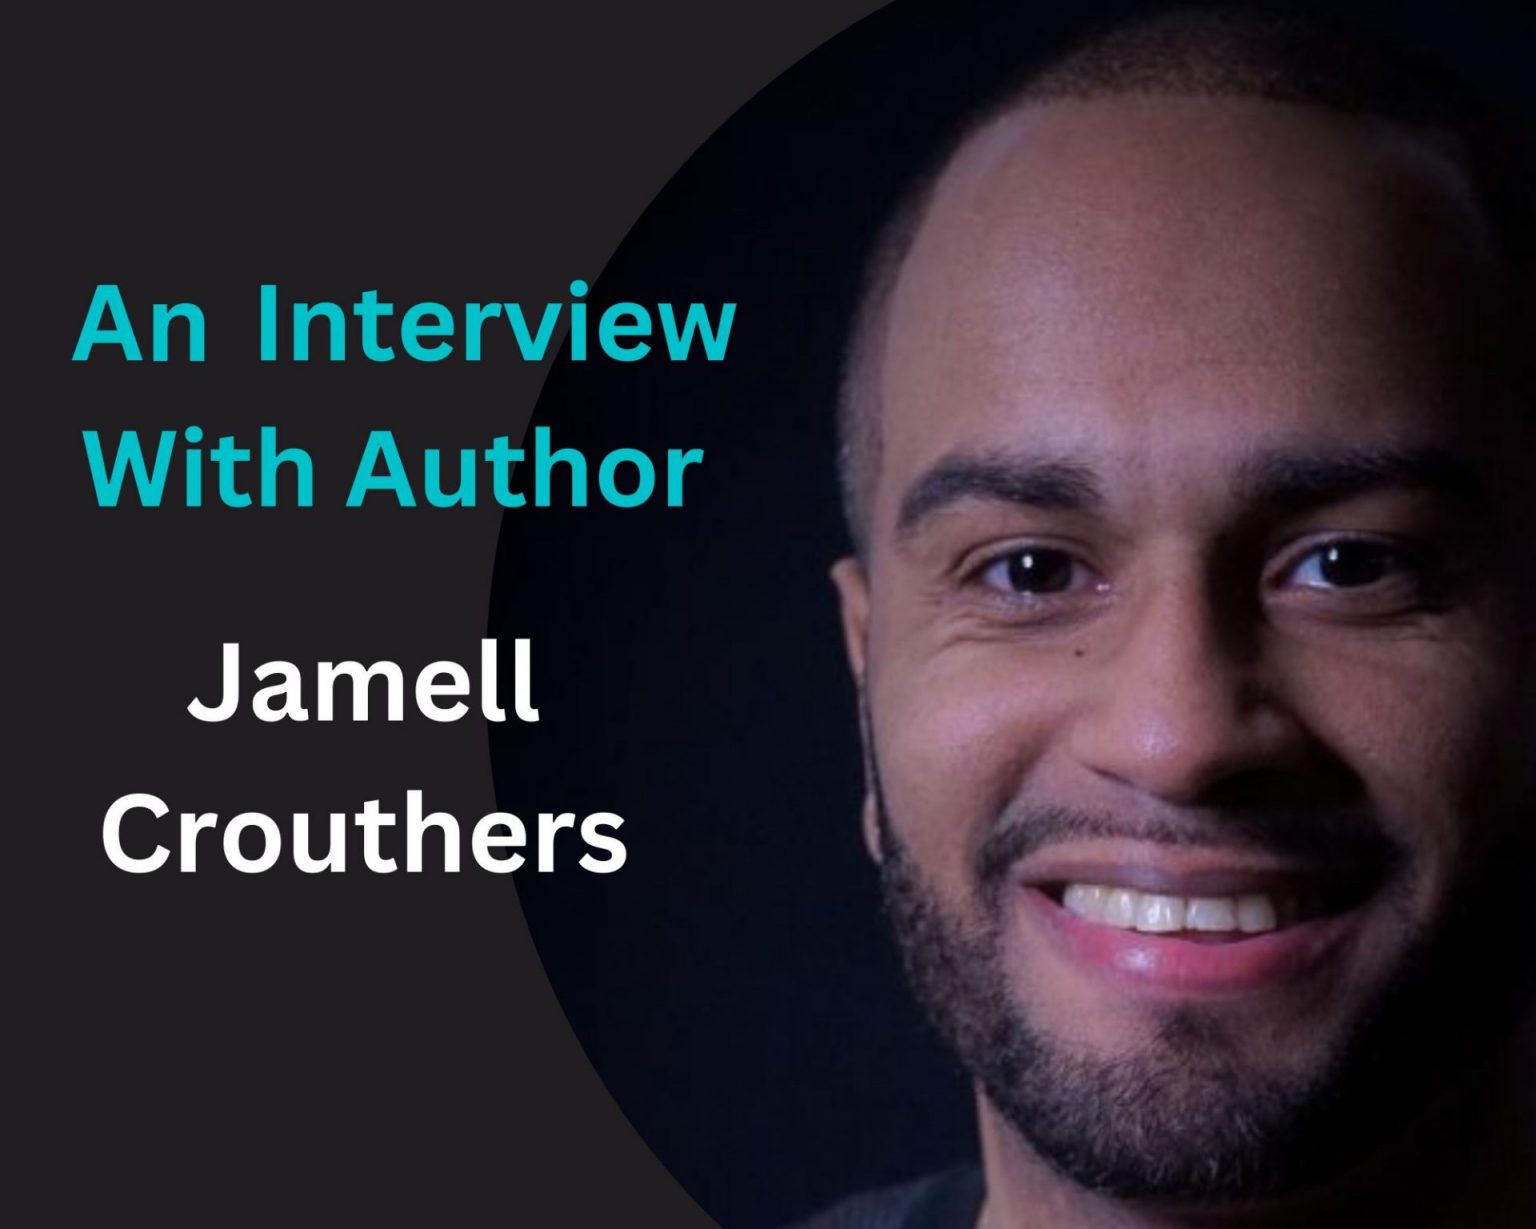 Jamell crouthers